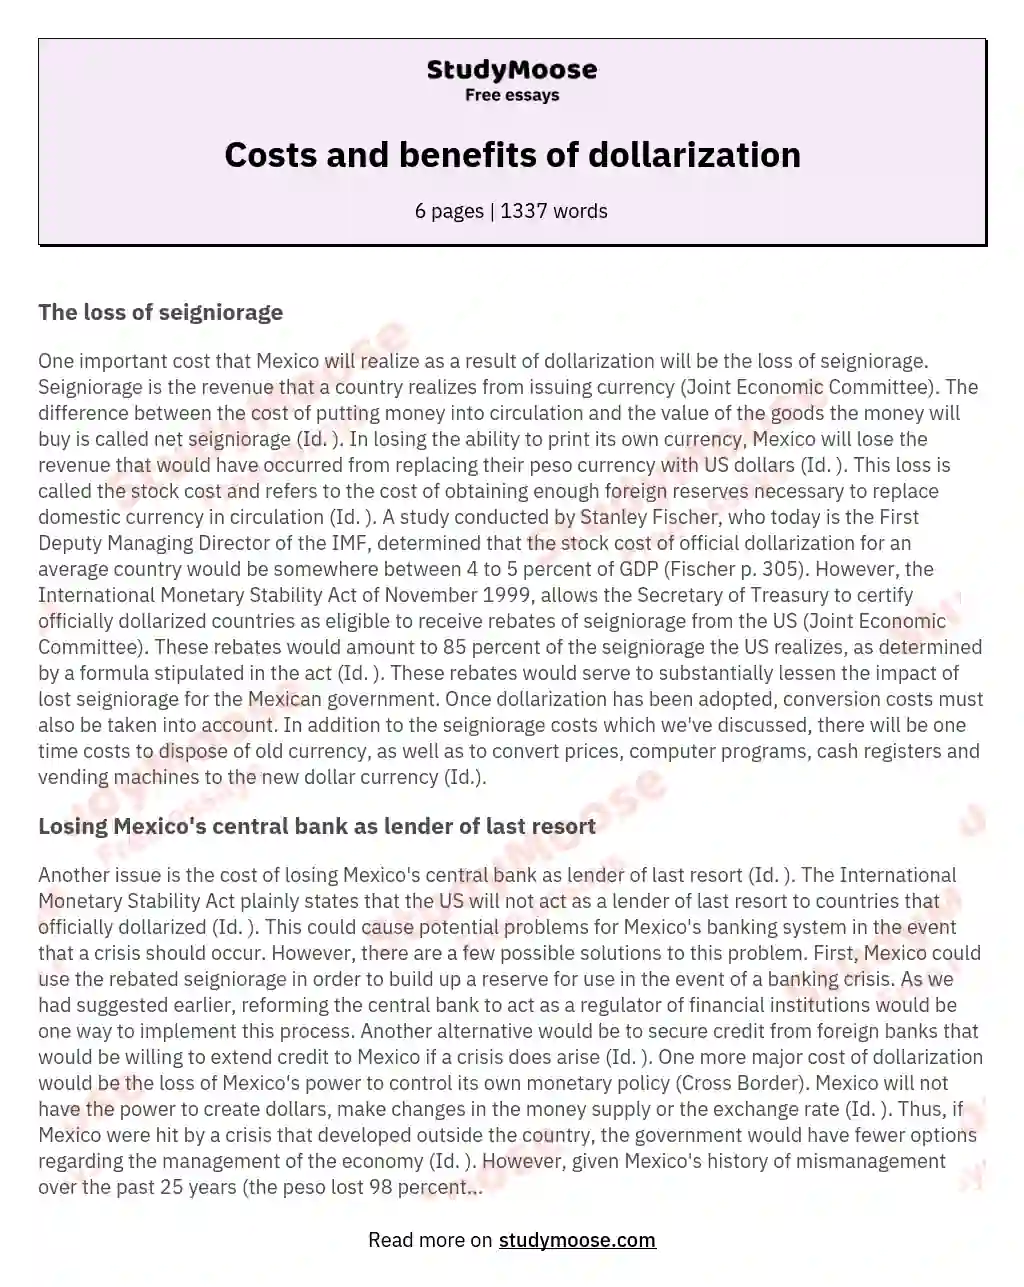 Costs and benefits of dollarization